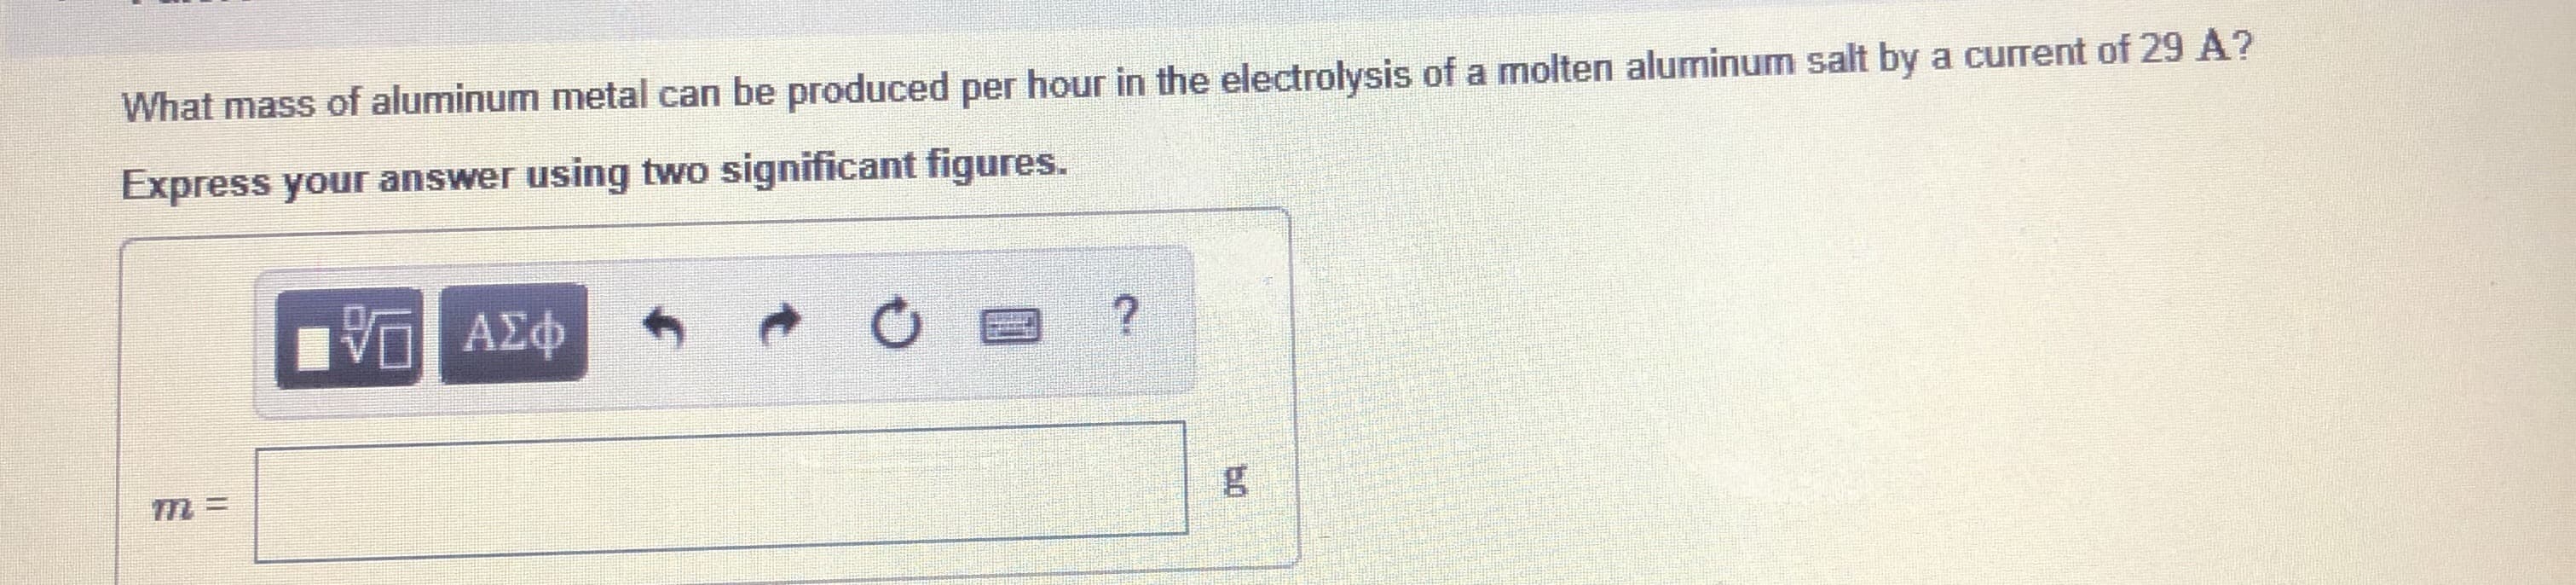 What mass of aluminum metal can be produced per hour in the electrolysis of a molten aluminum salt by a current of 29 A?
Express your answer using two significant figures.
VO AEO
